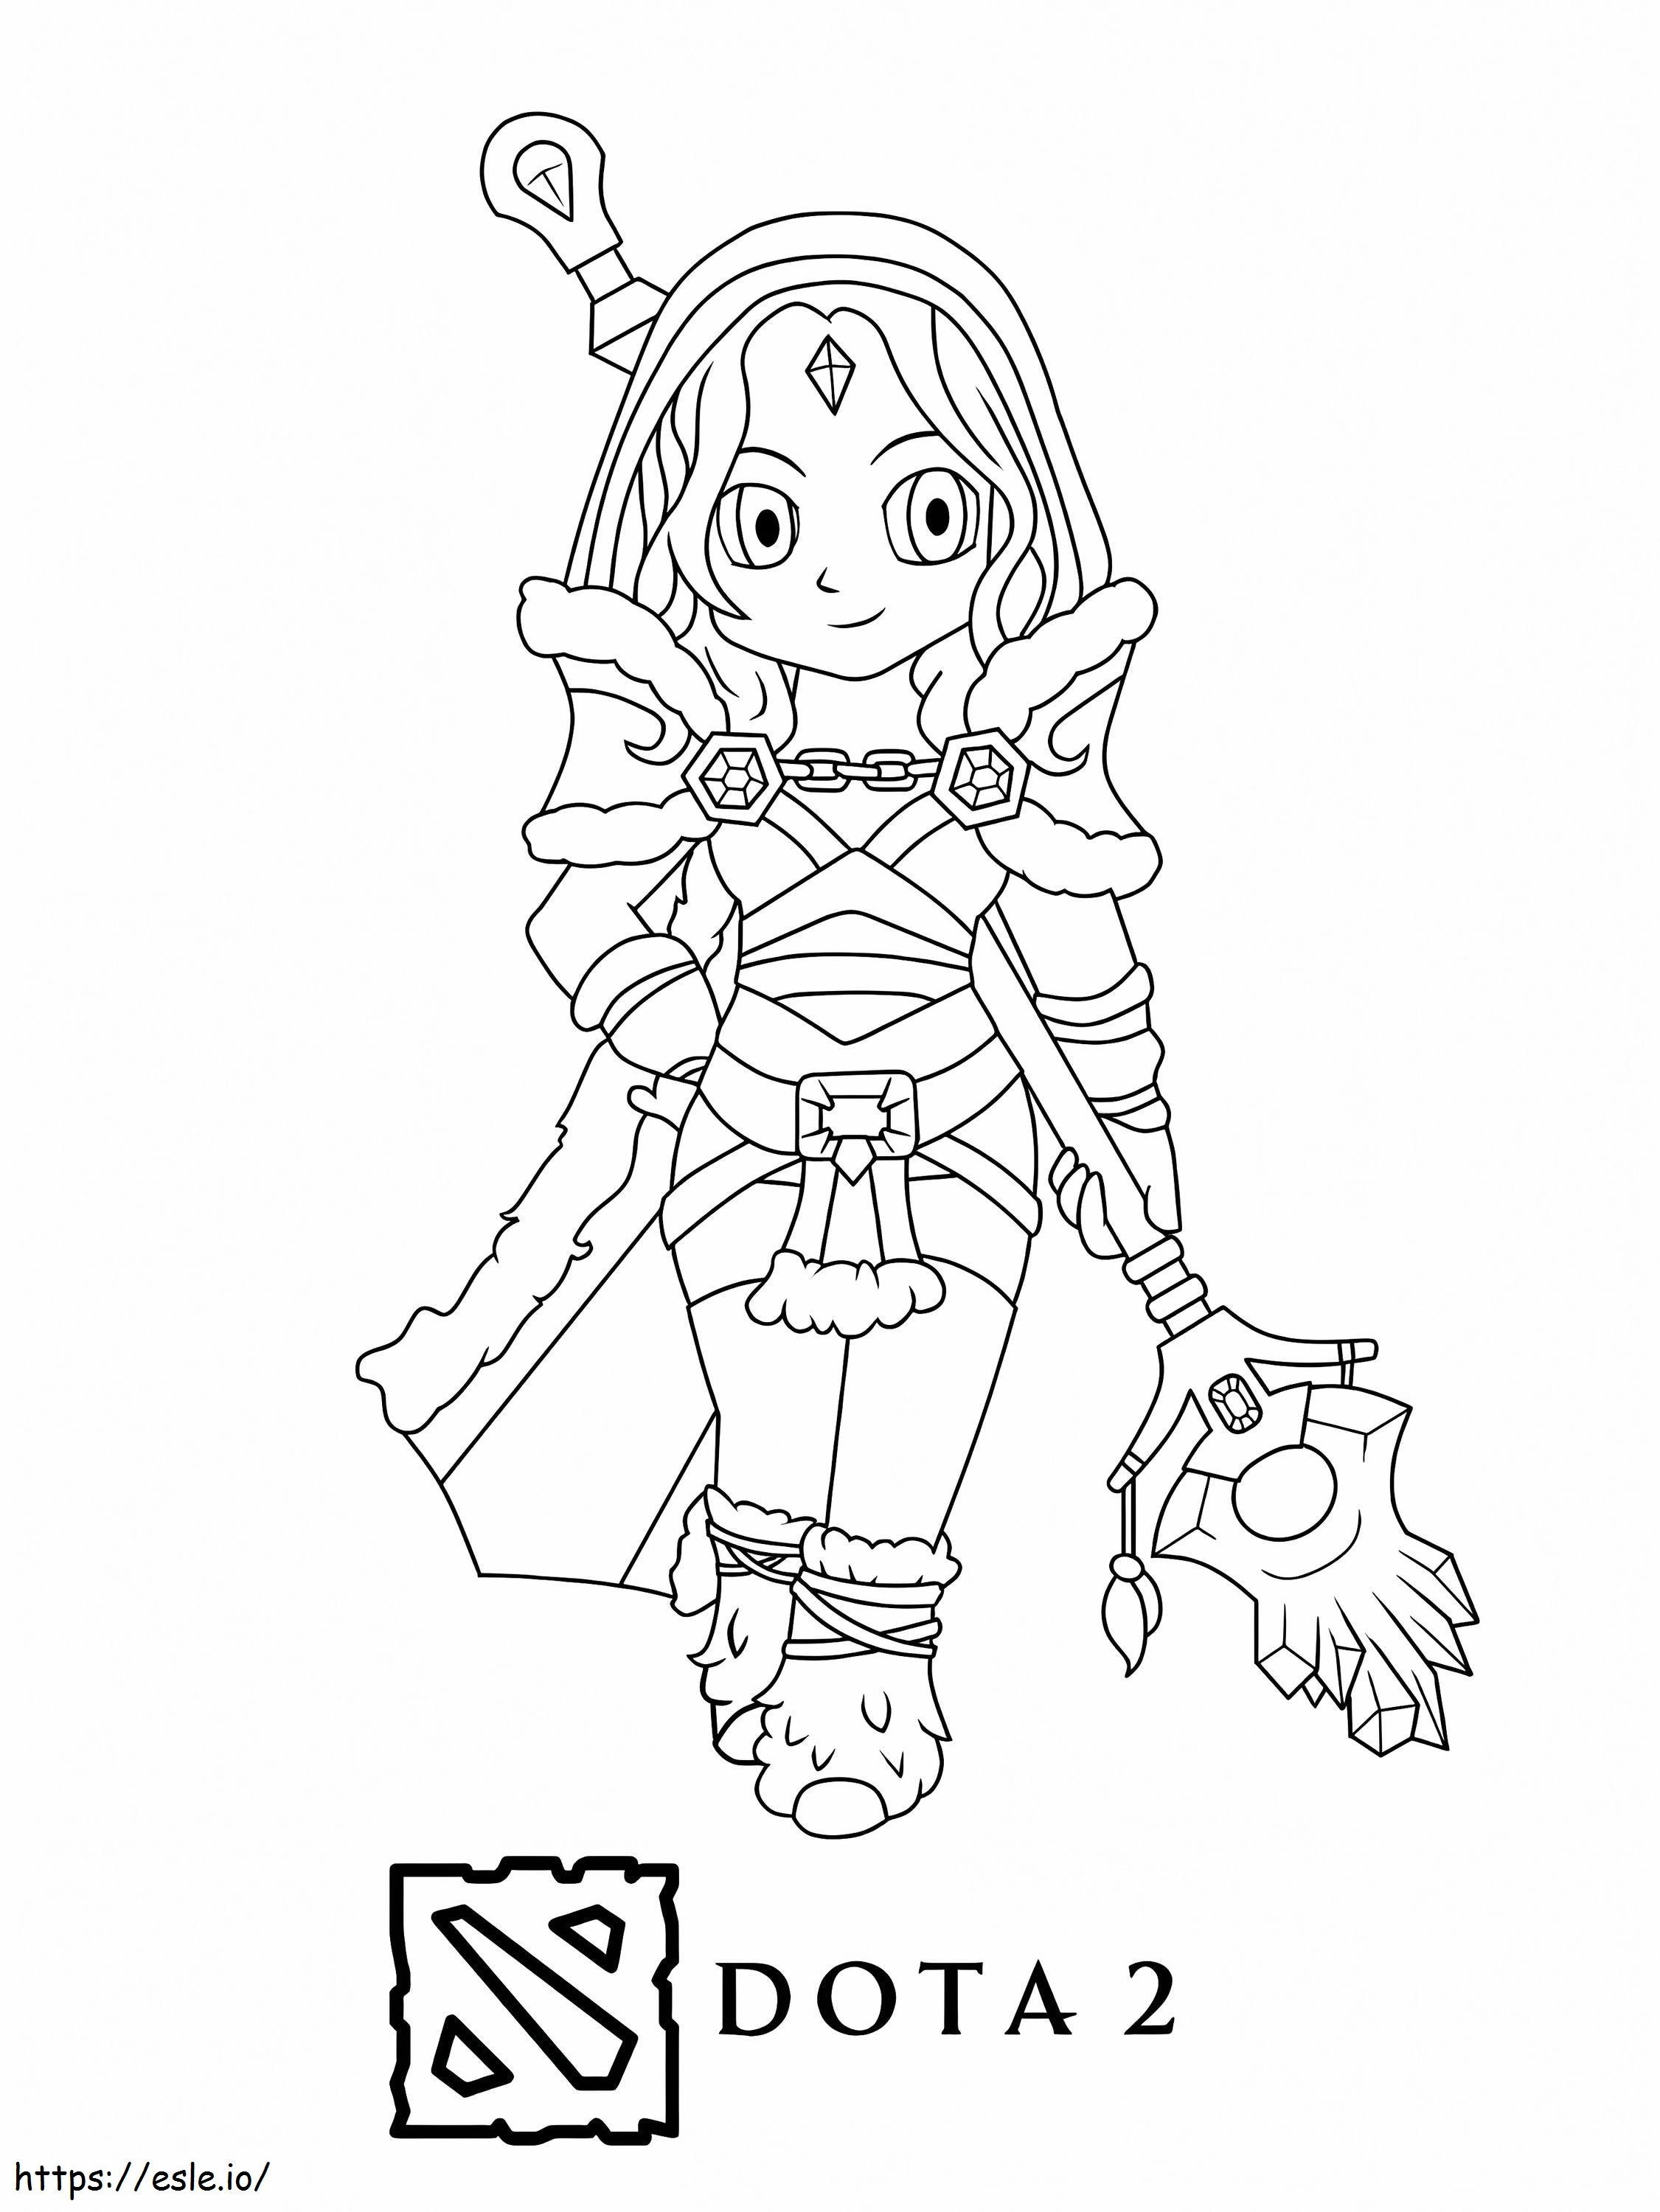 1592010269 12423534634 coloring page